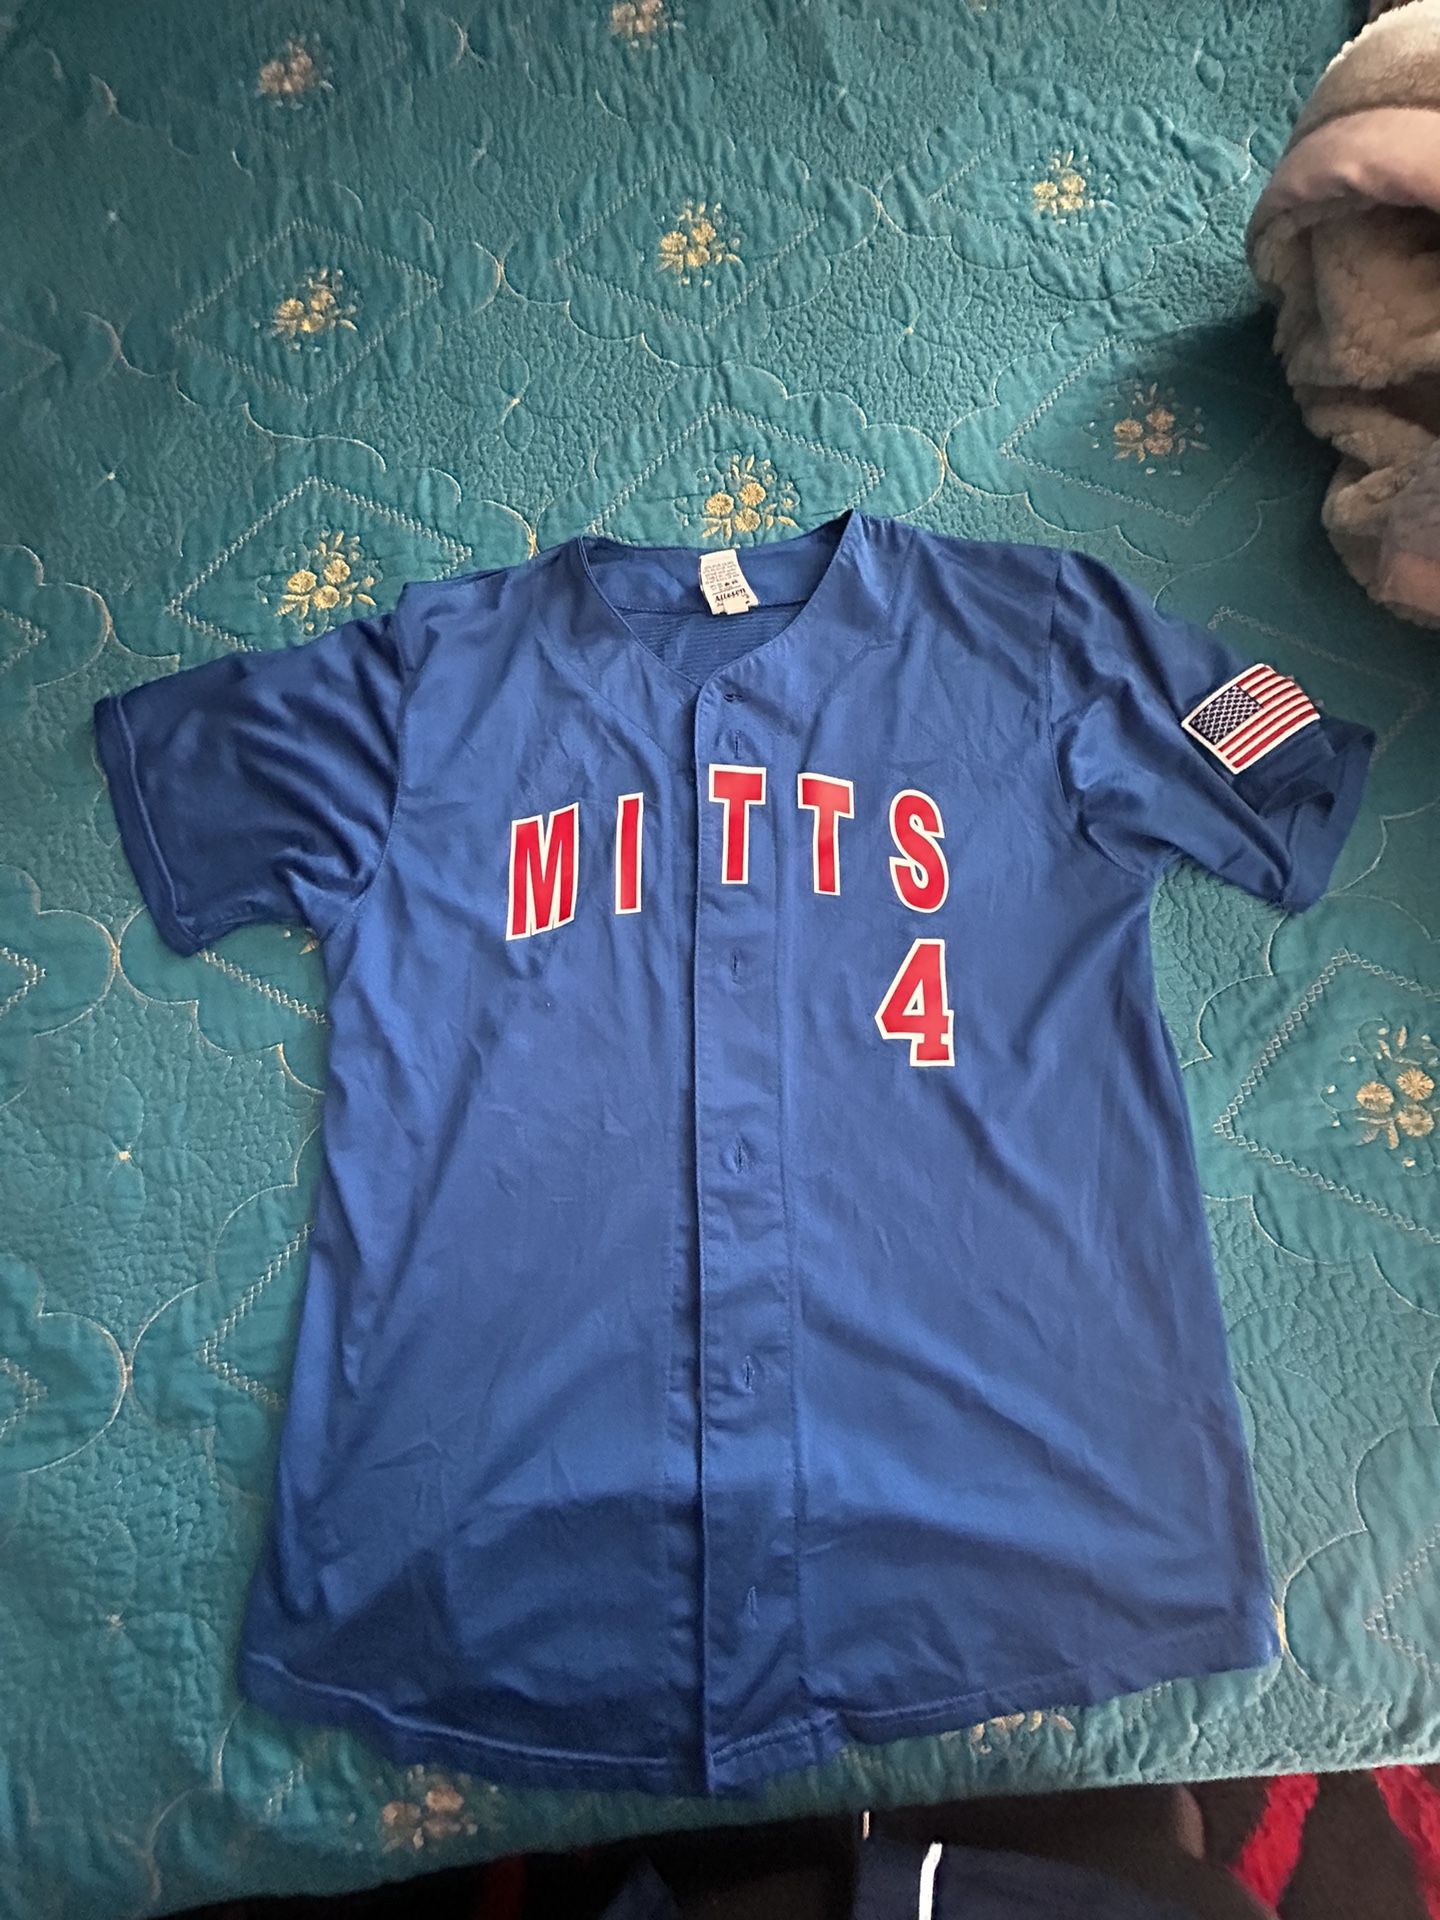 Mitts Johnson Number 4 Jersey